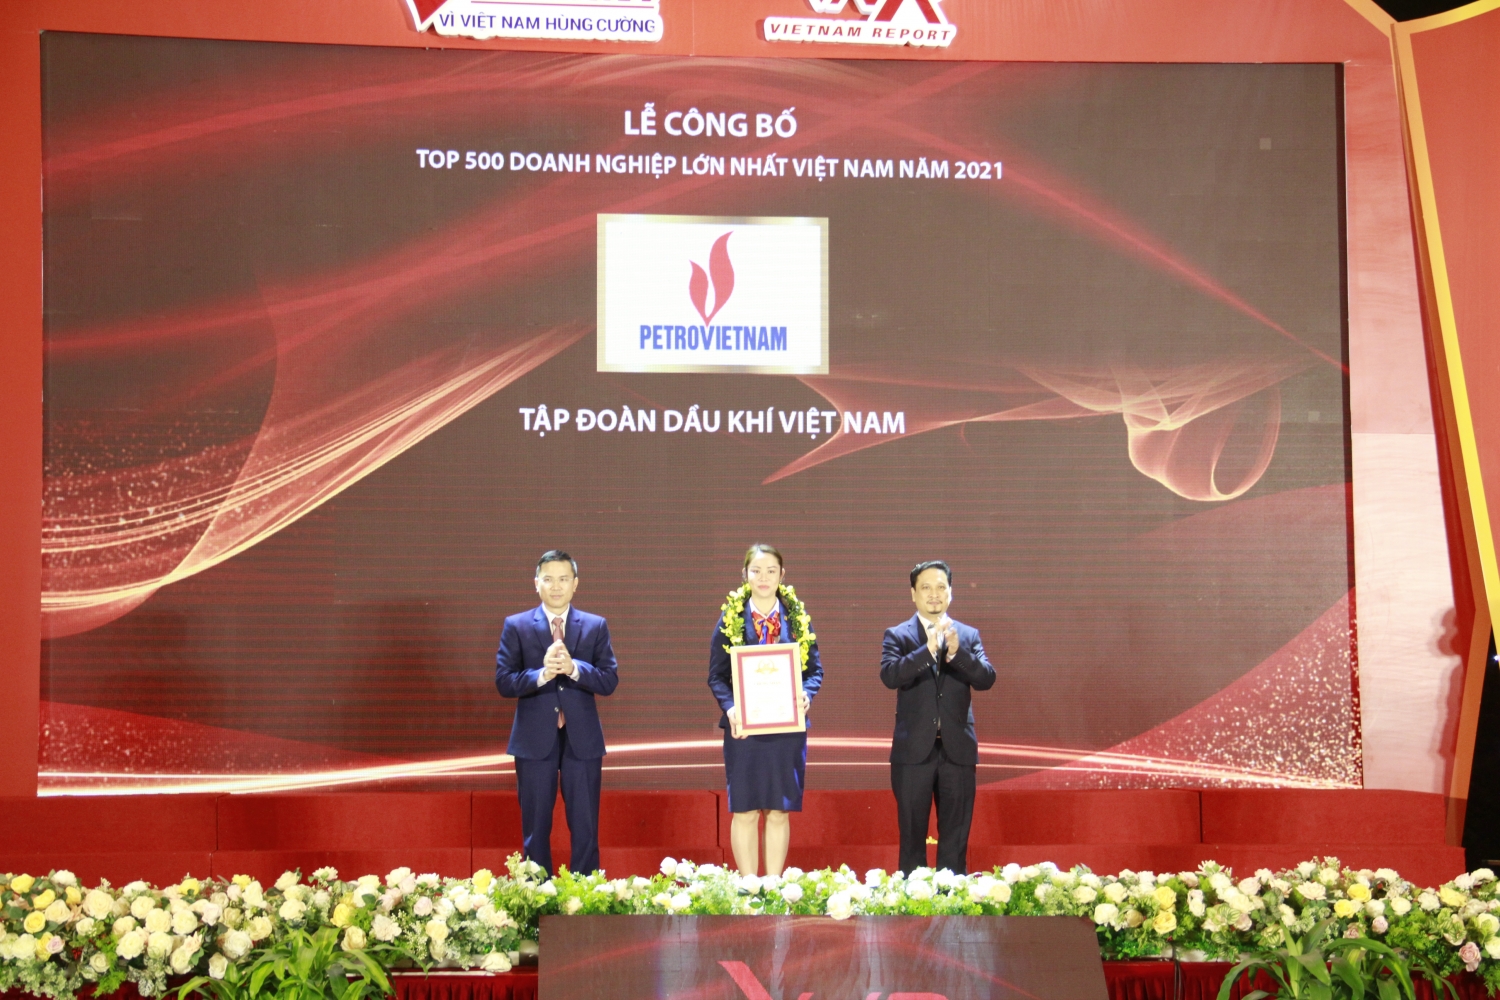 Petrovietnam and many oil and gas enterprises affirm position in Top 500 largest enterprises in Vietnam